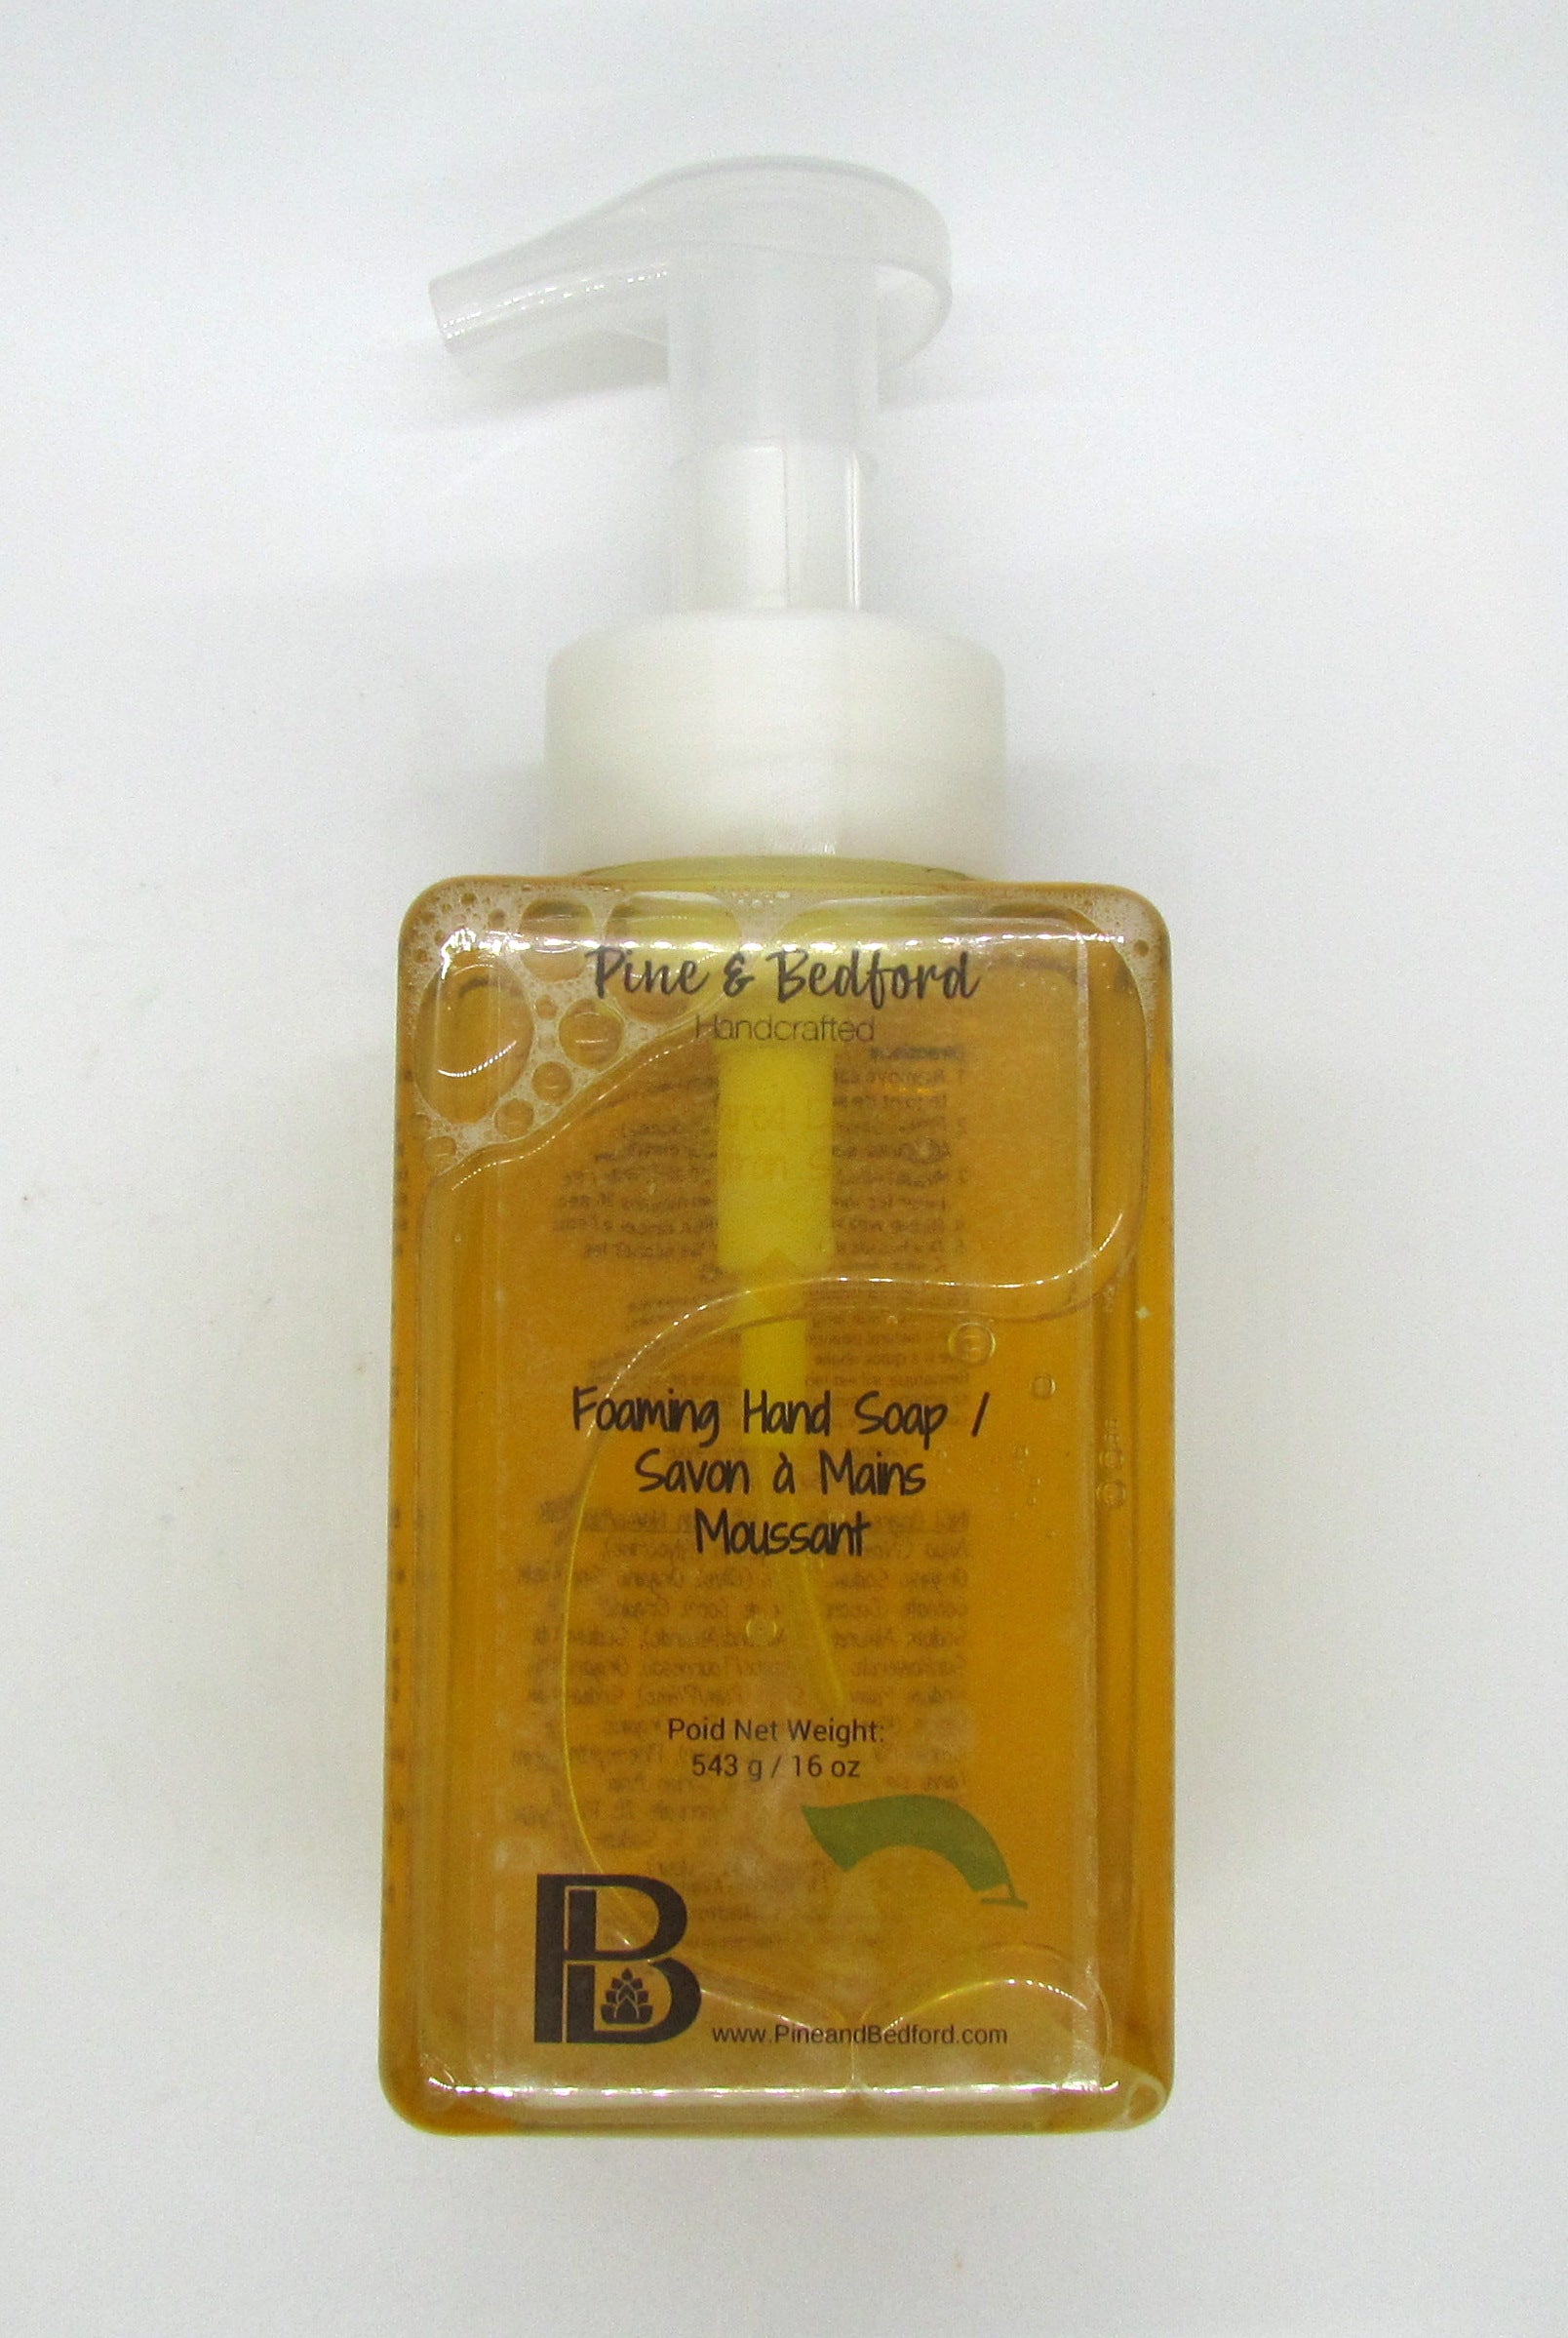 Pine & Bedford's Foaming Hand Soap made with Sweet Almond, Rice Bran and Castor Oils.  Available in an assortment of Fragrances and Essential Oils.  Sugared Lemon fragrance shown here.